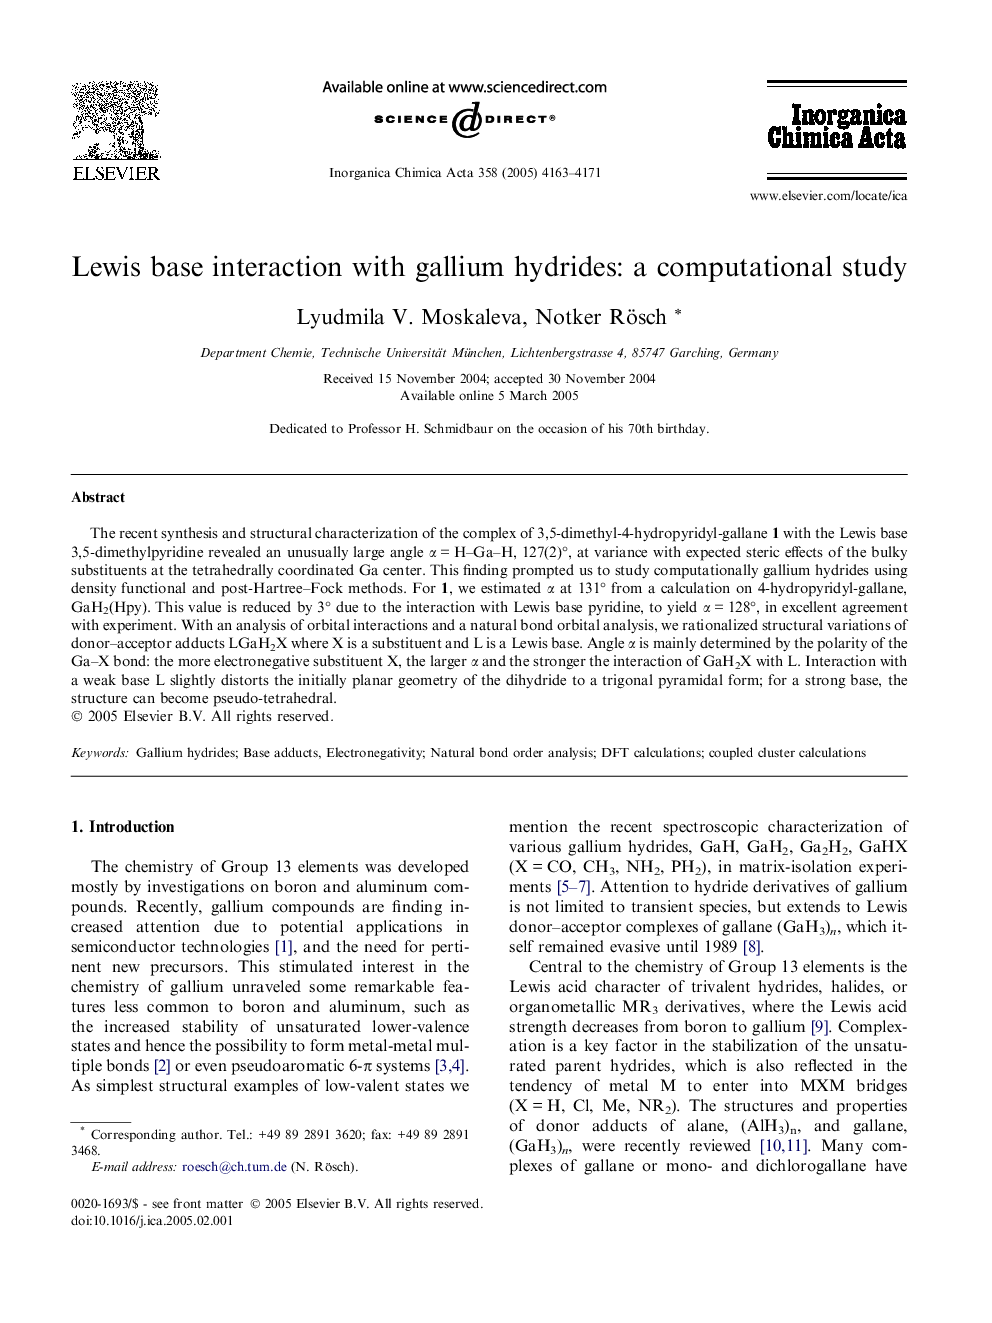 Lewis base interaction with gallium hydrides: a computational study